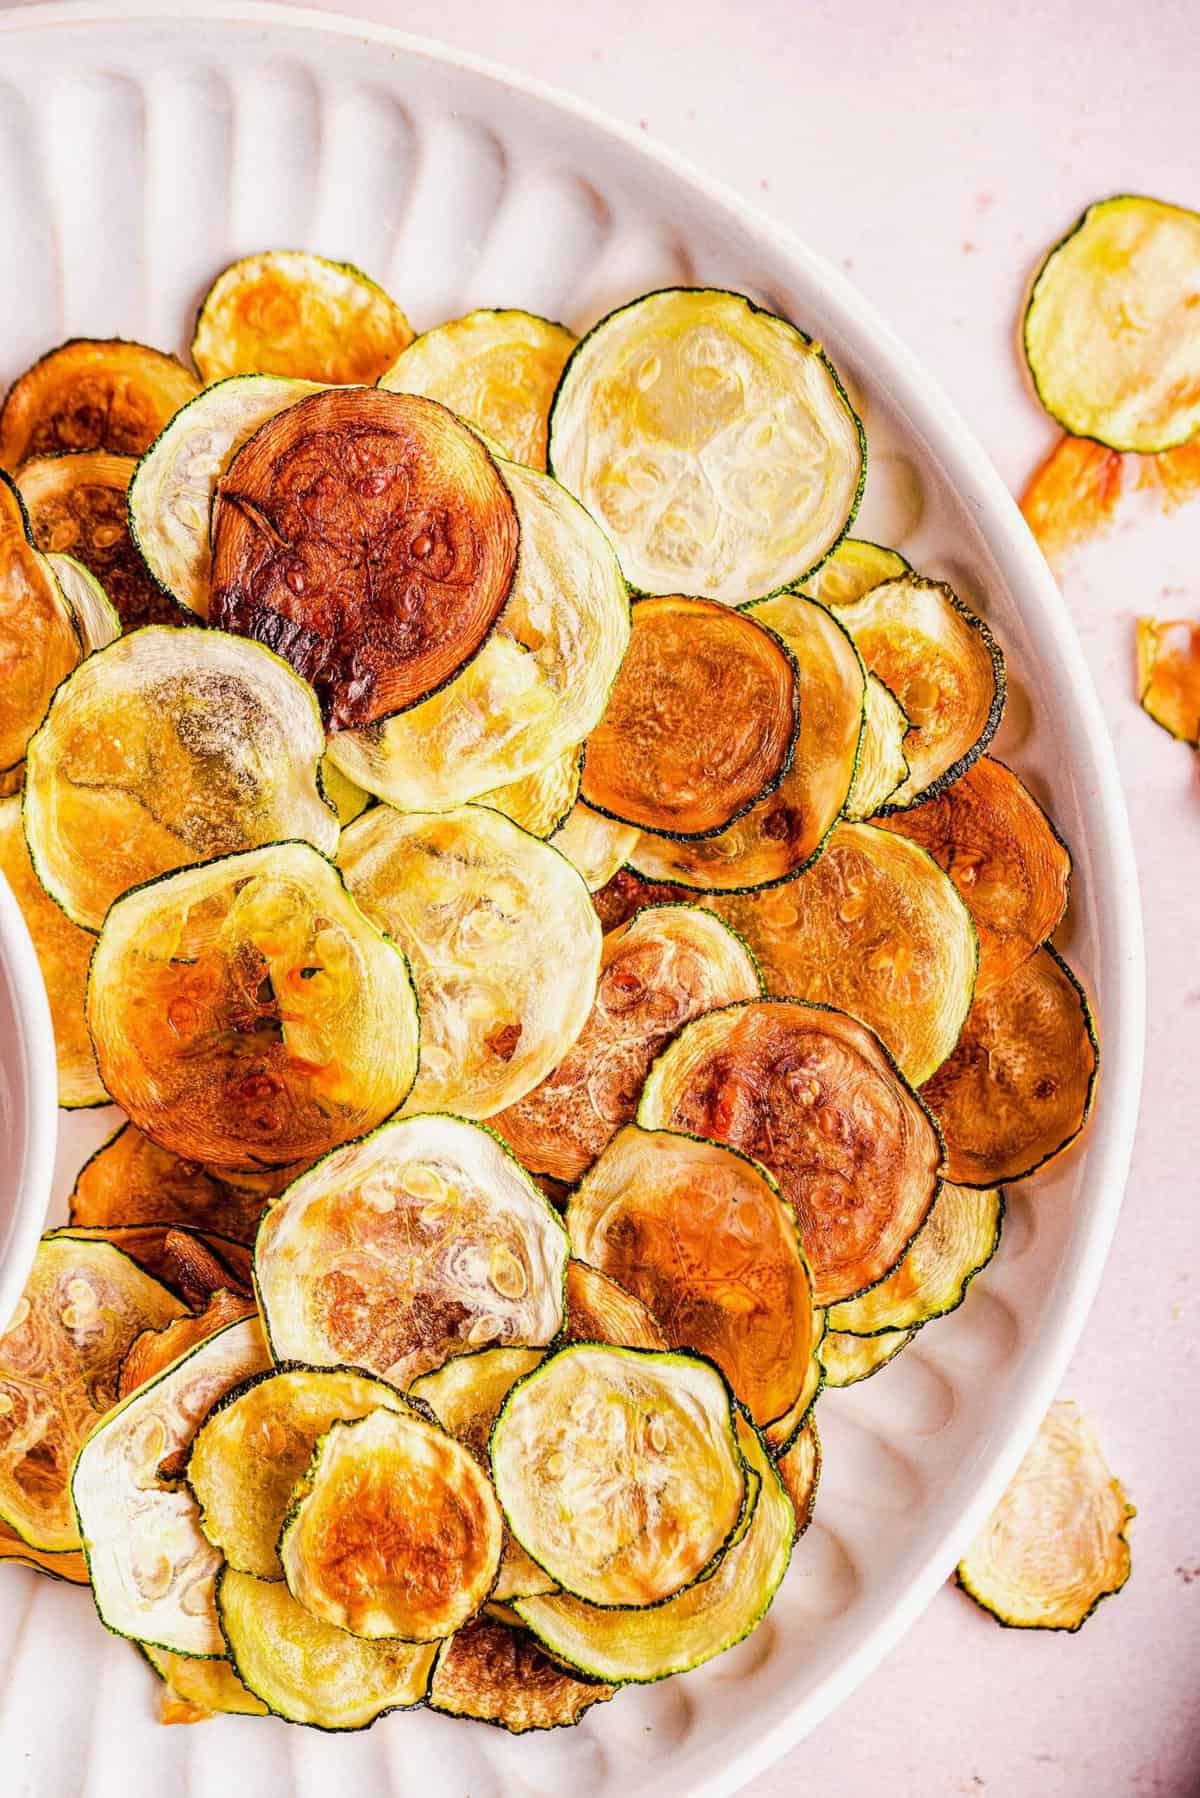 Zucchini chips on white plate